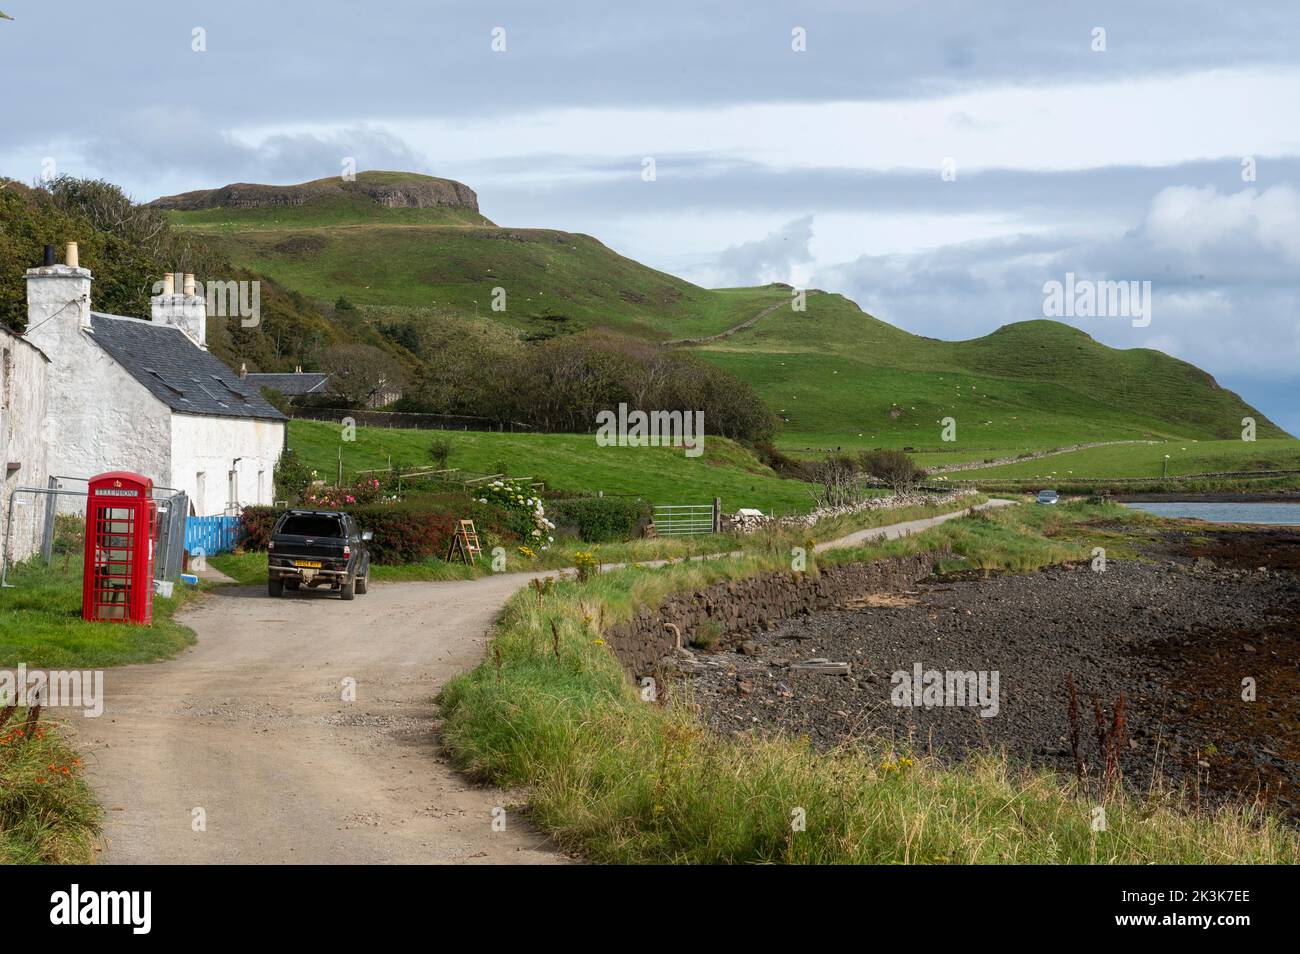 September 2022: Isle of Canna, Inner Hebrides, Scotland The old red phone box and post office on the road along the shore Stock Photo